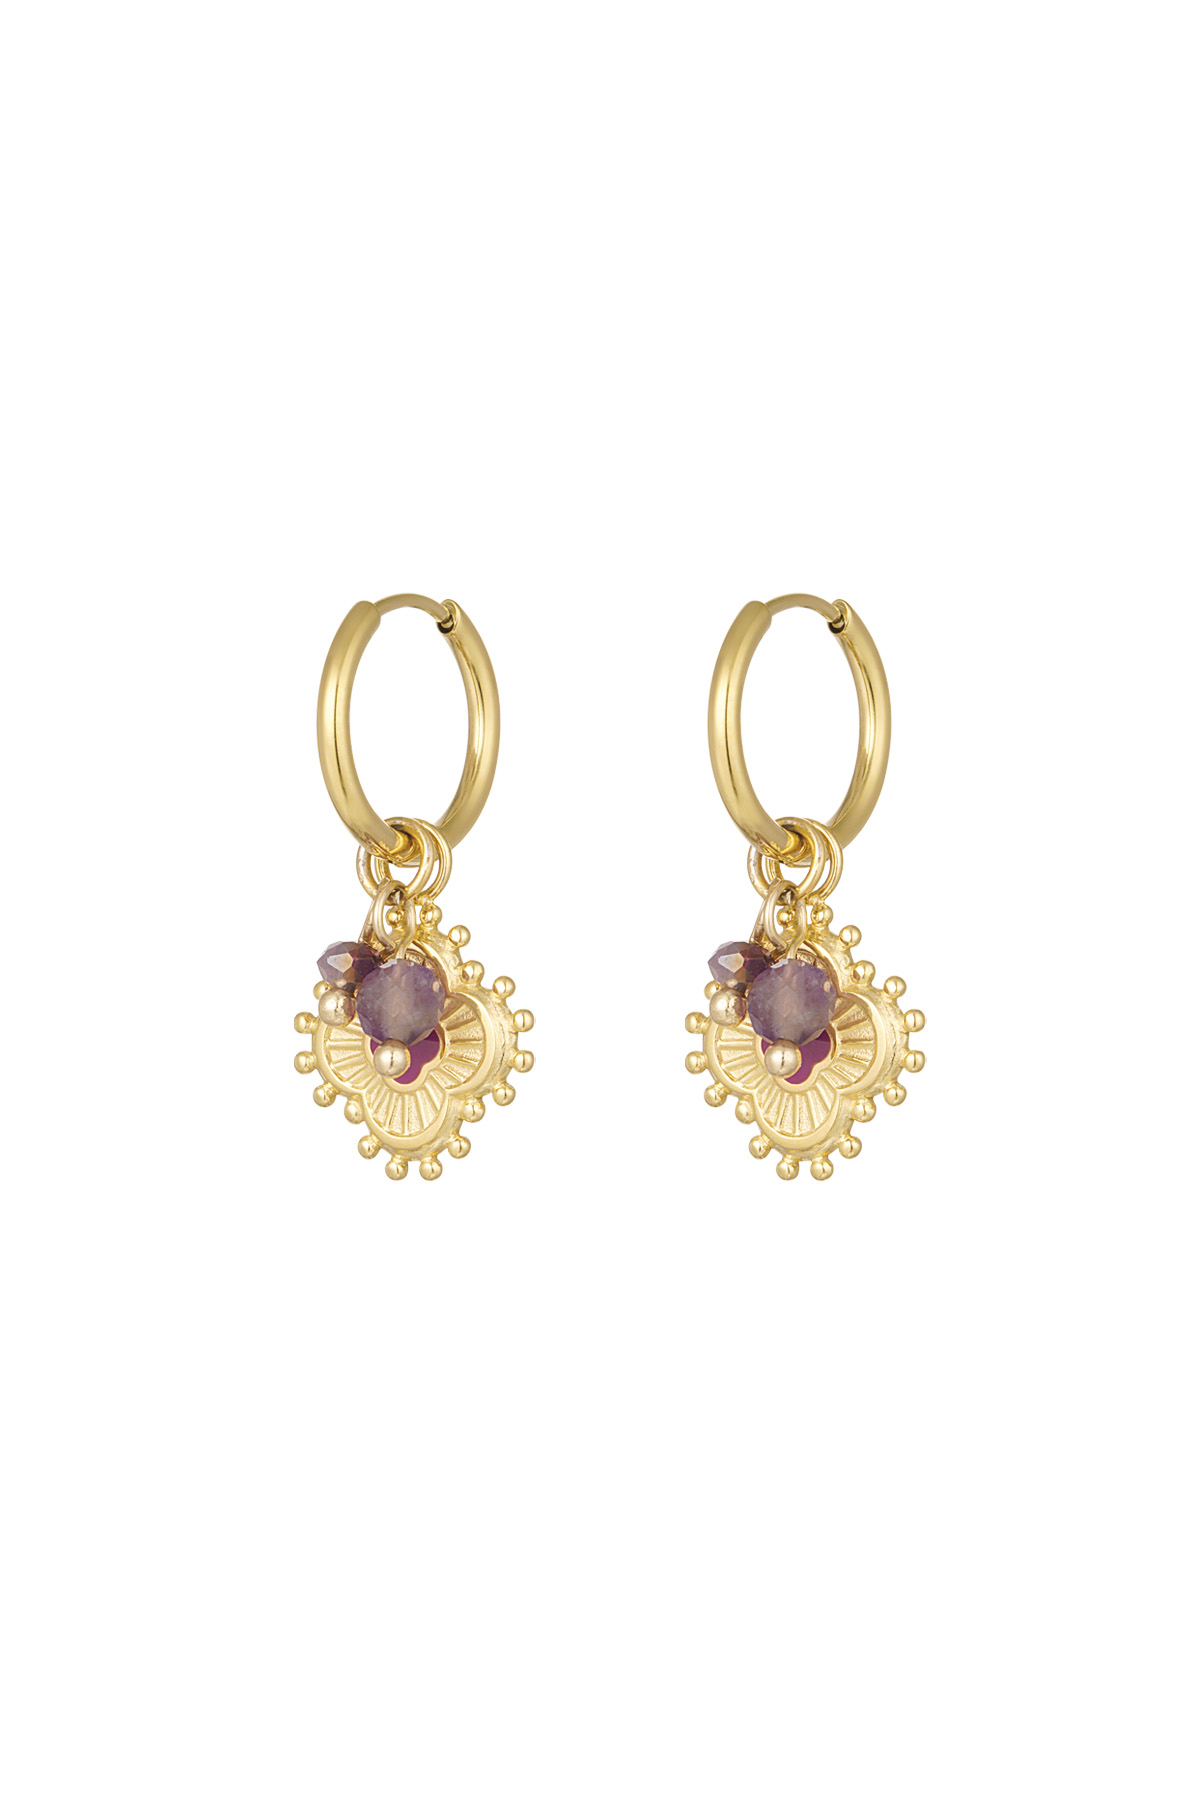 Clover earrings with beads - gold/purple 